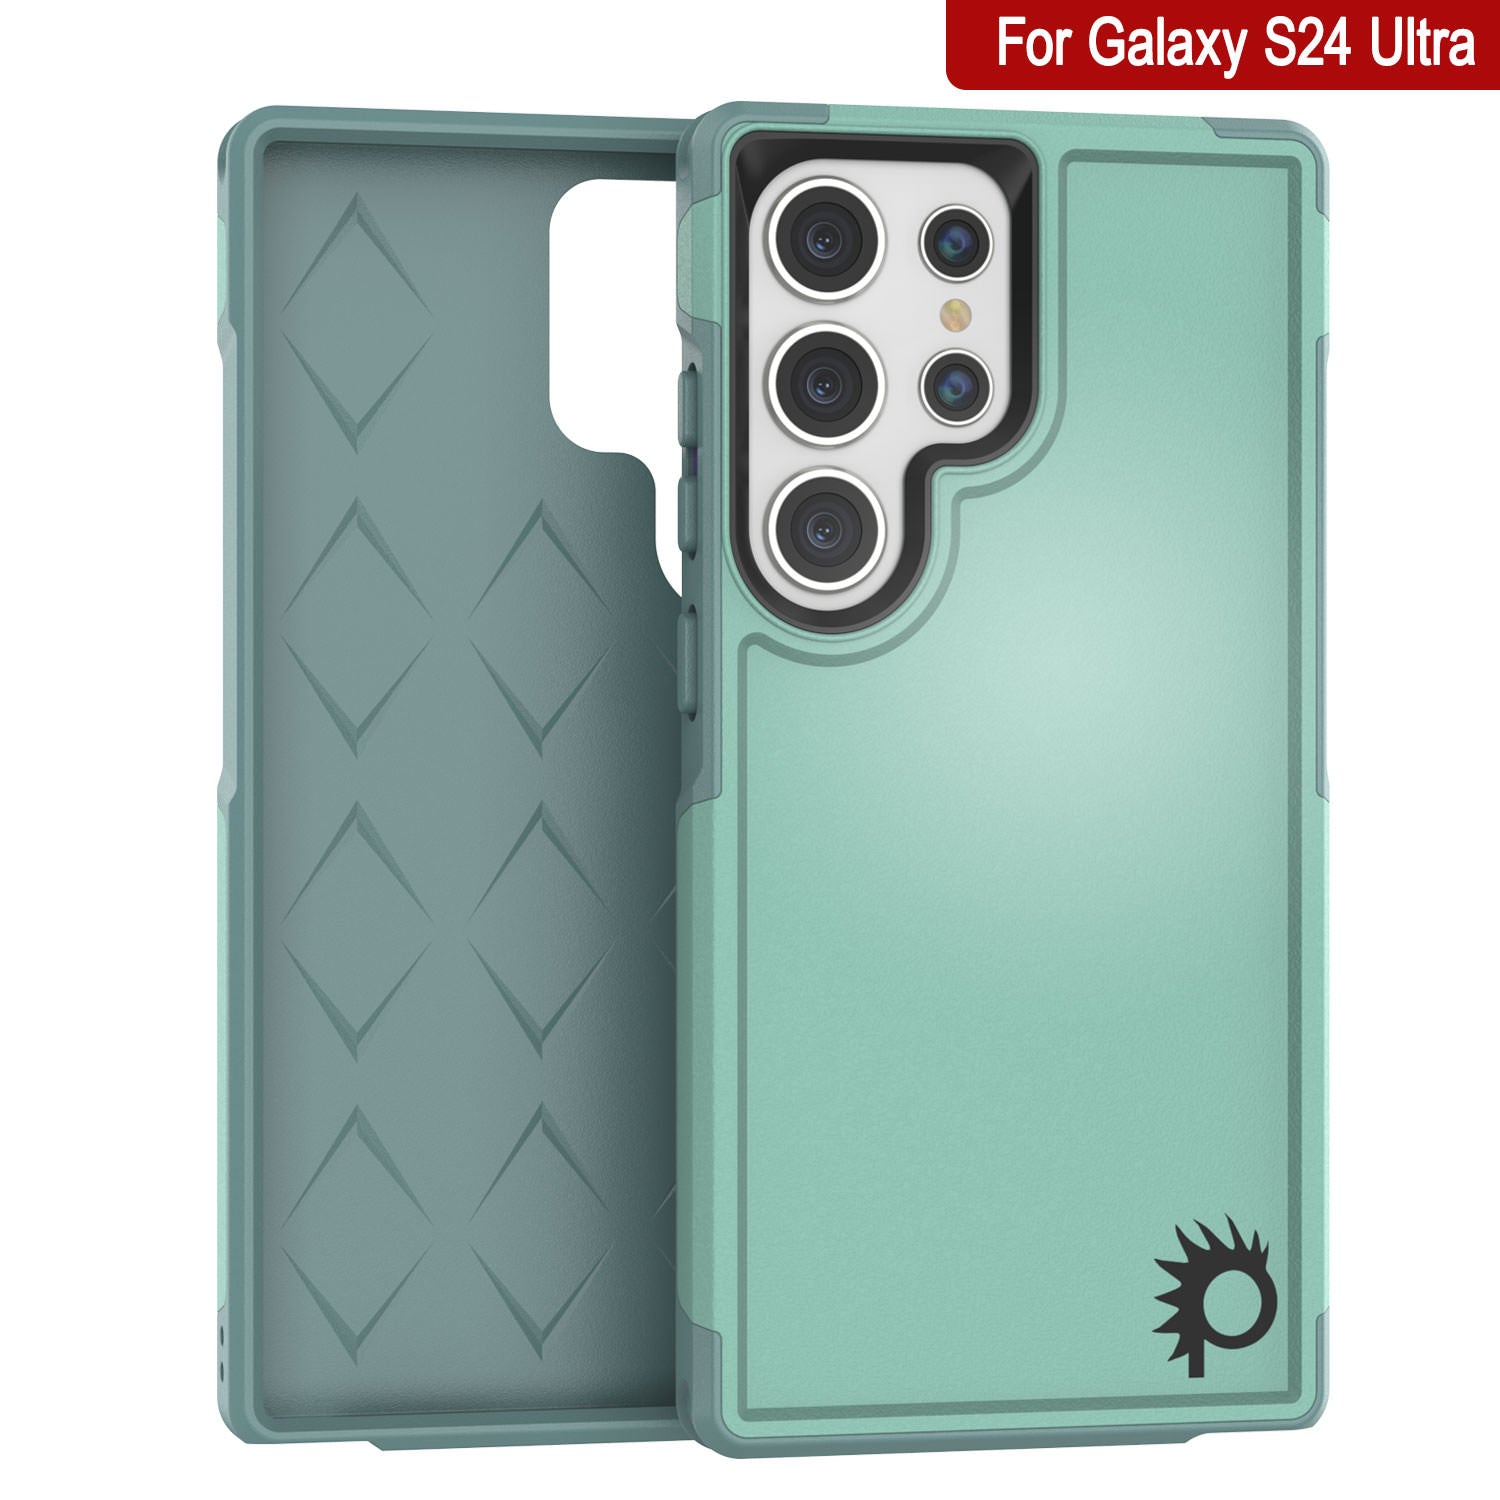 PunkCase Galaxy S24 Ultra Case, [Spartan 2.0 Series] Clear Rugged Heavy Duty Cover [Teal]